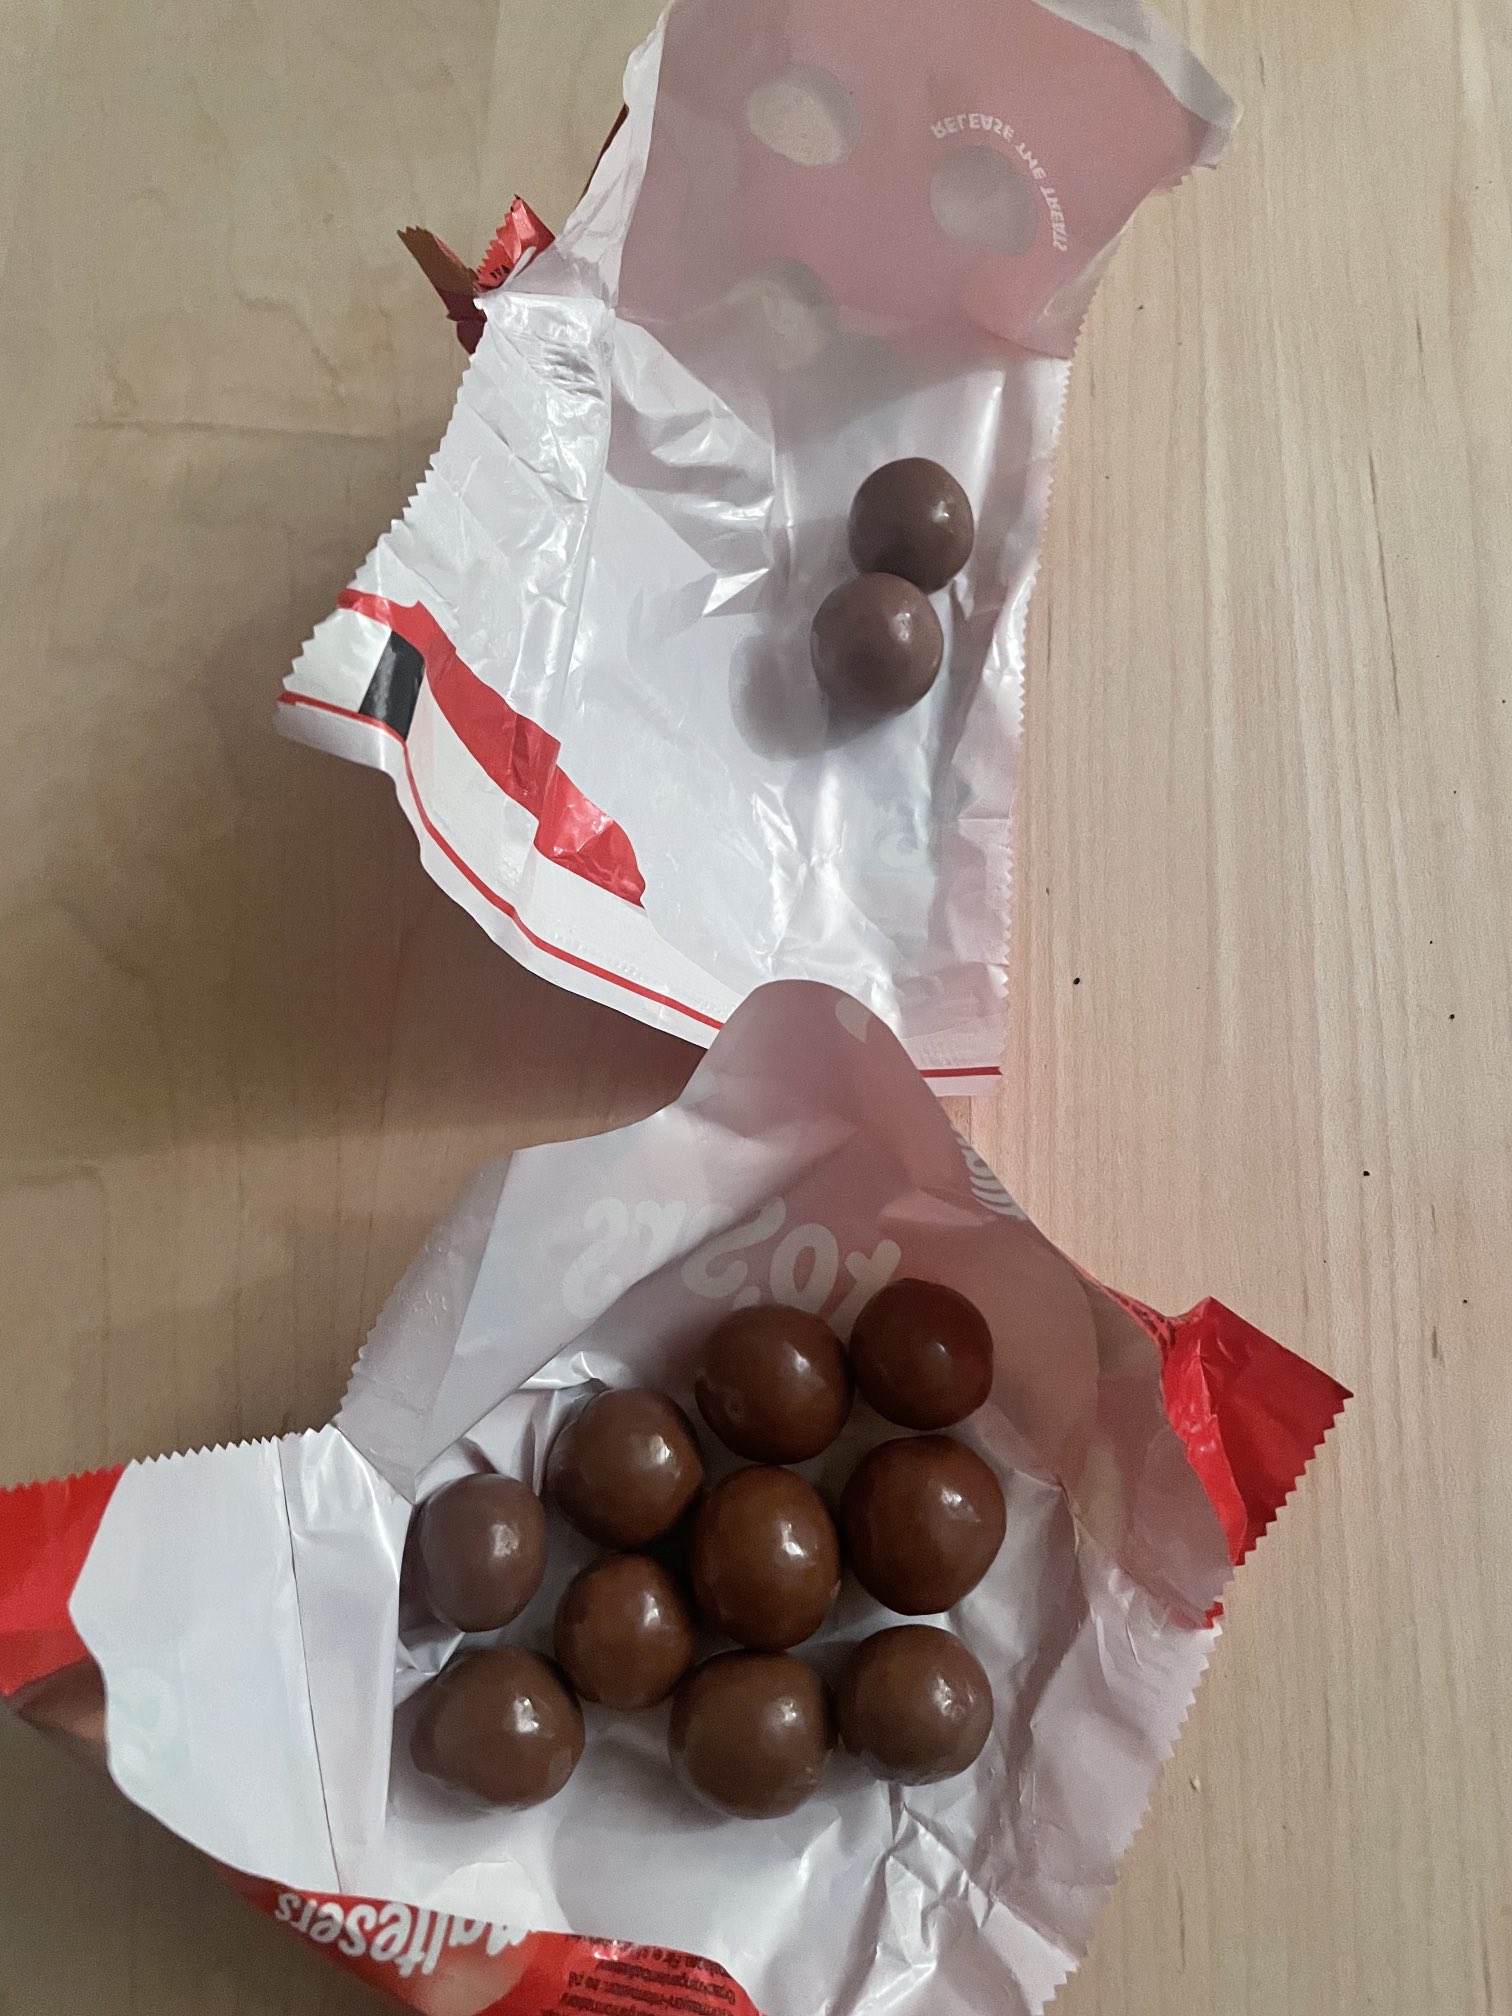 Nadia Silver on X: One of these fun size packets of Maltesers is